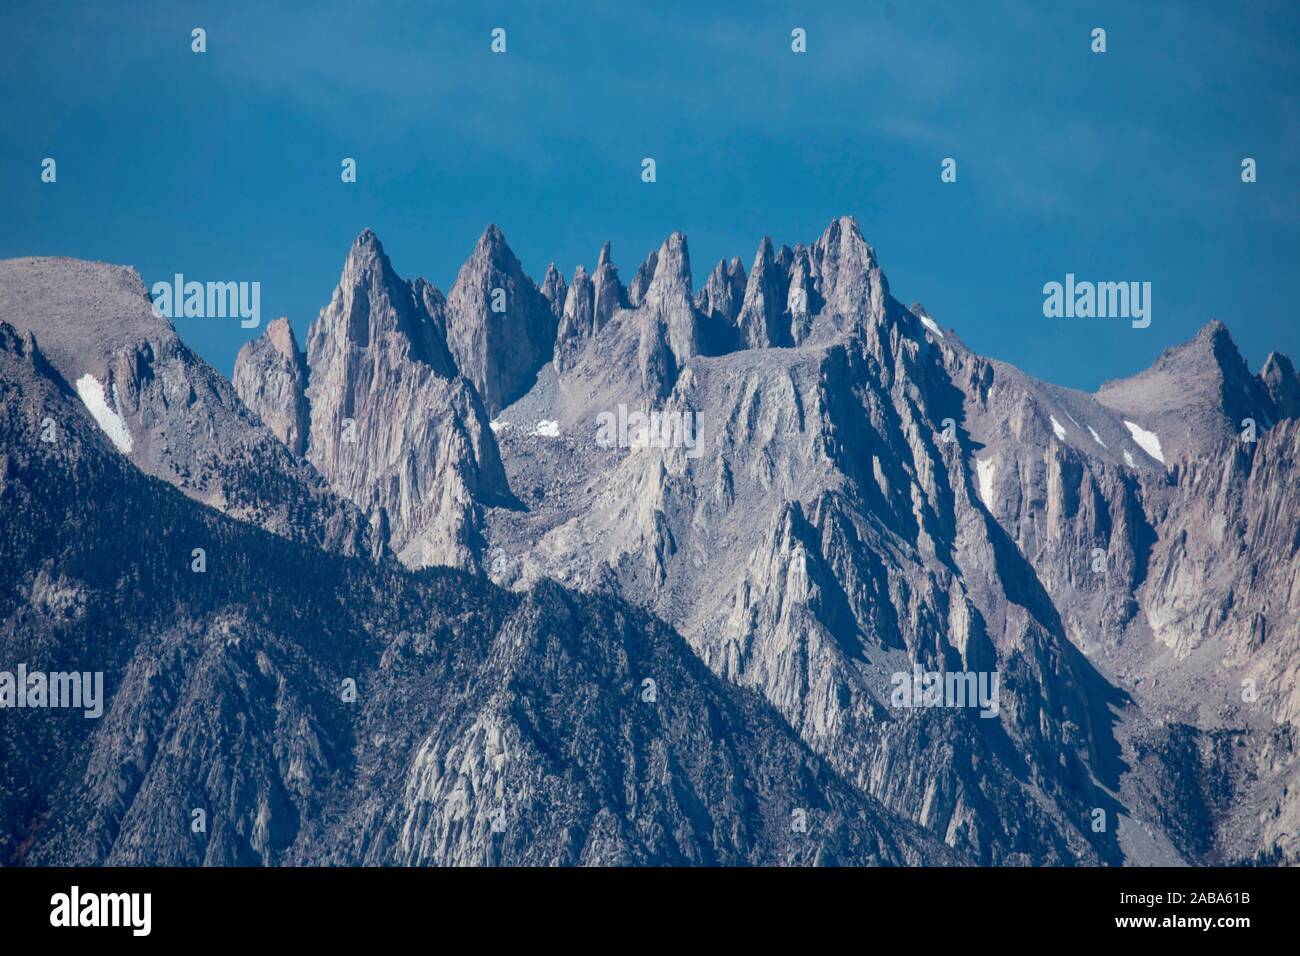 The granite peaks of the Sierra Nevada Mountain Range from the Owens Valley of California. Stock Photo